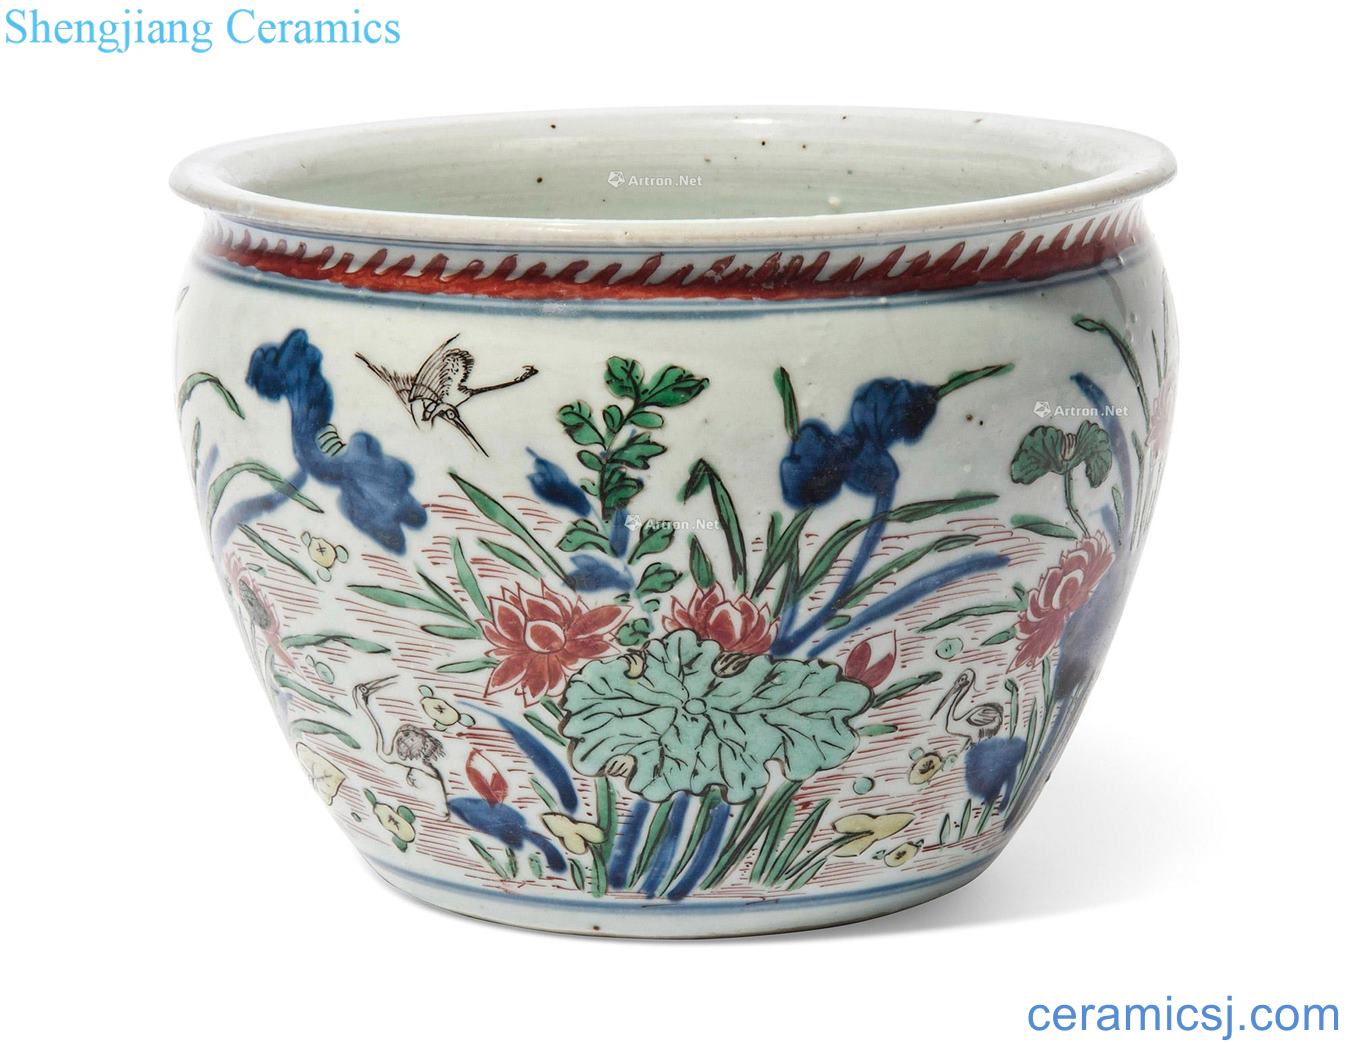 The late Ming dynasty The lotus pond colorful tattoos basin